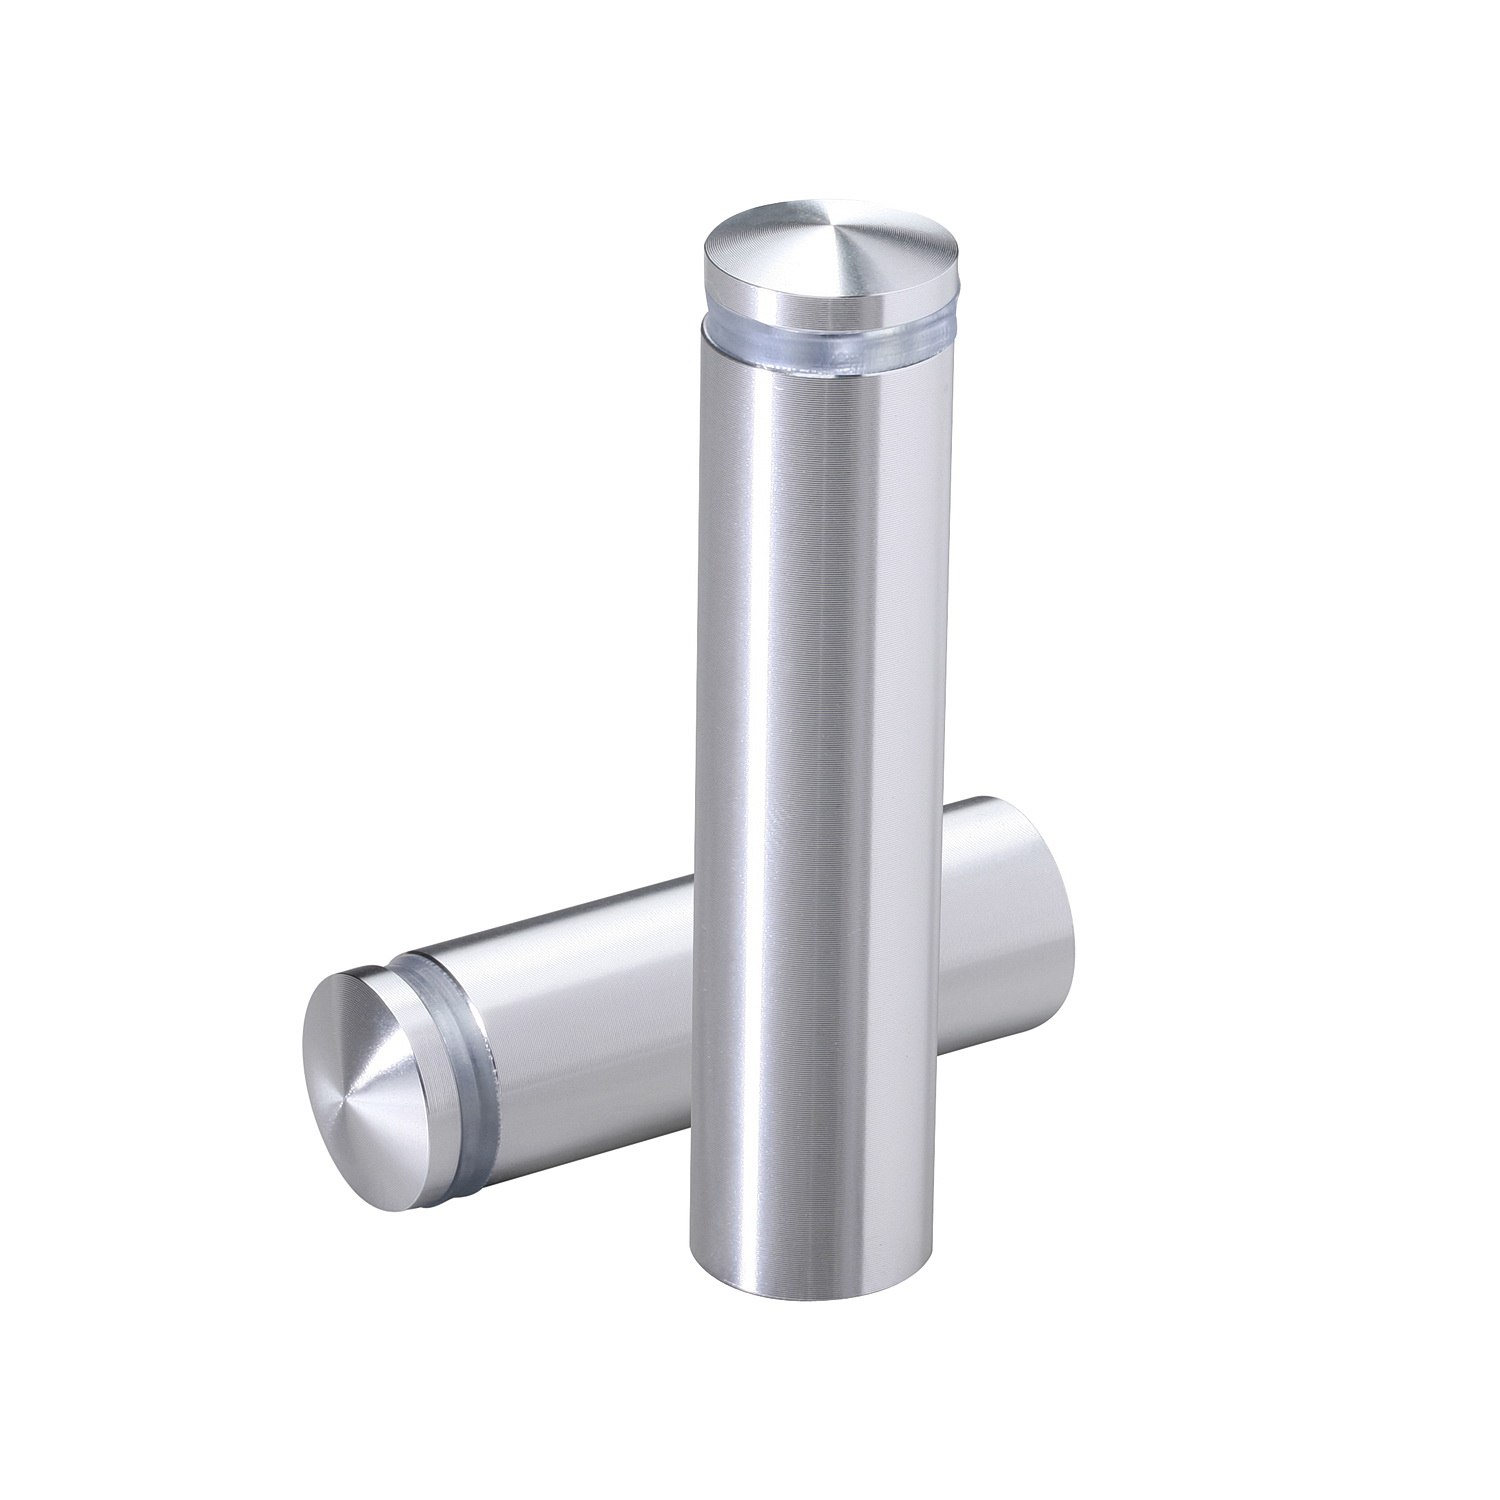 5/8'' Diameter X 2-1/2'' Barrel Length, Aluminum Rounded Head Standoffs, Shiny Anodized Finish Easy Fasten Standoff (For Inside / Outside use) [Required Material Hole Size: 7/16'']